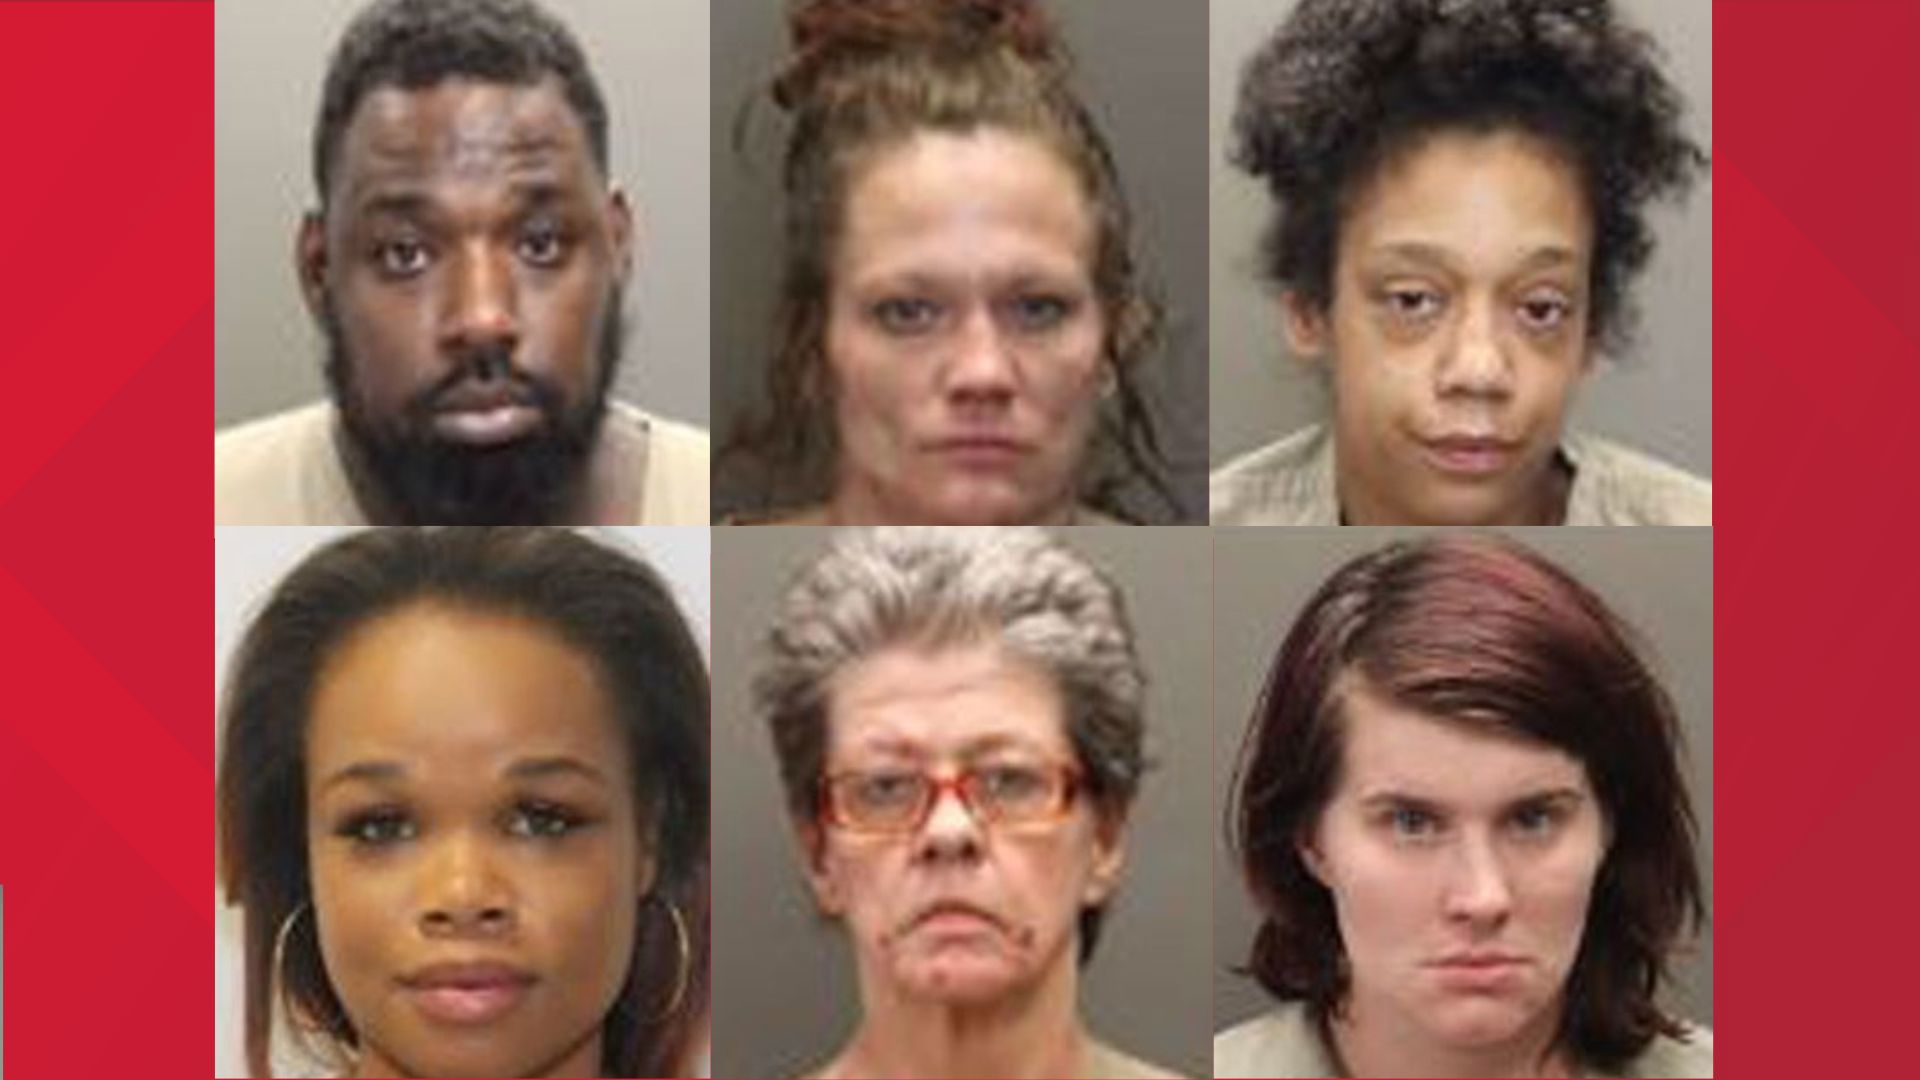 A Franklin County grand jury indicted the six members on April 24.